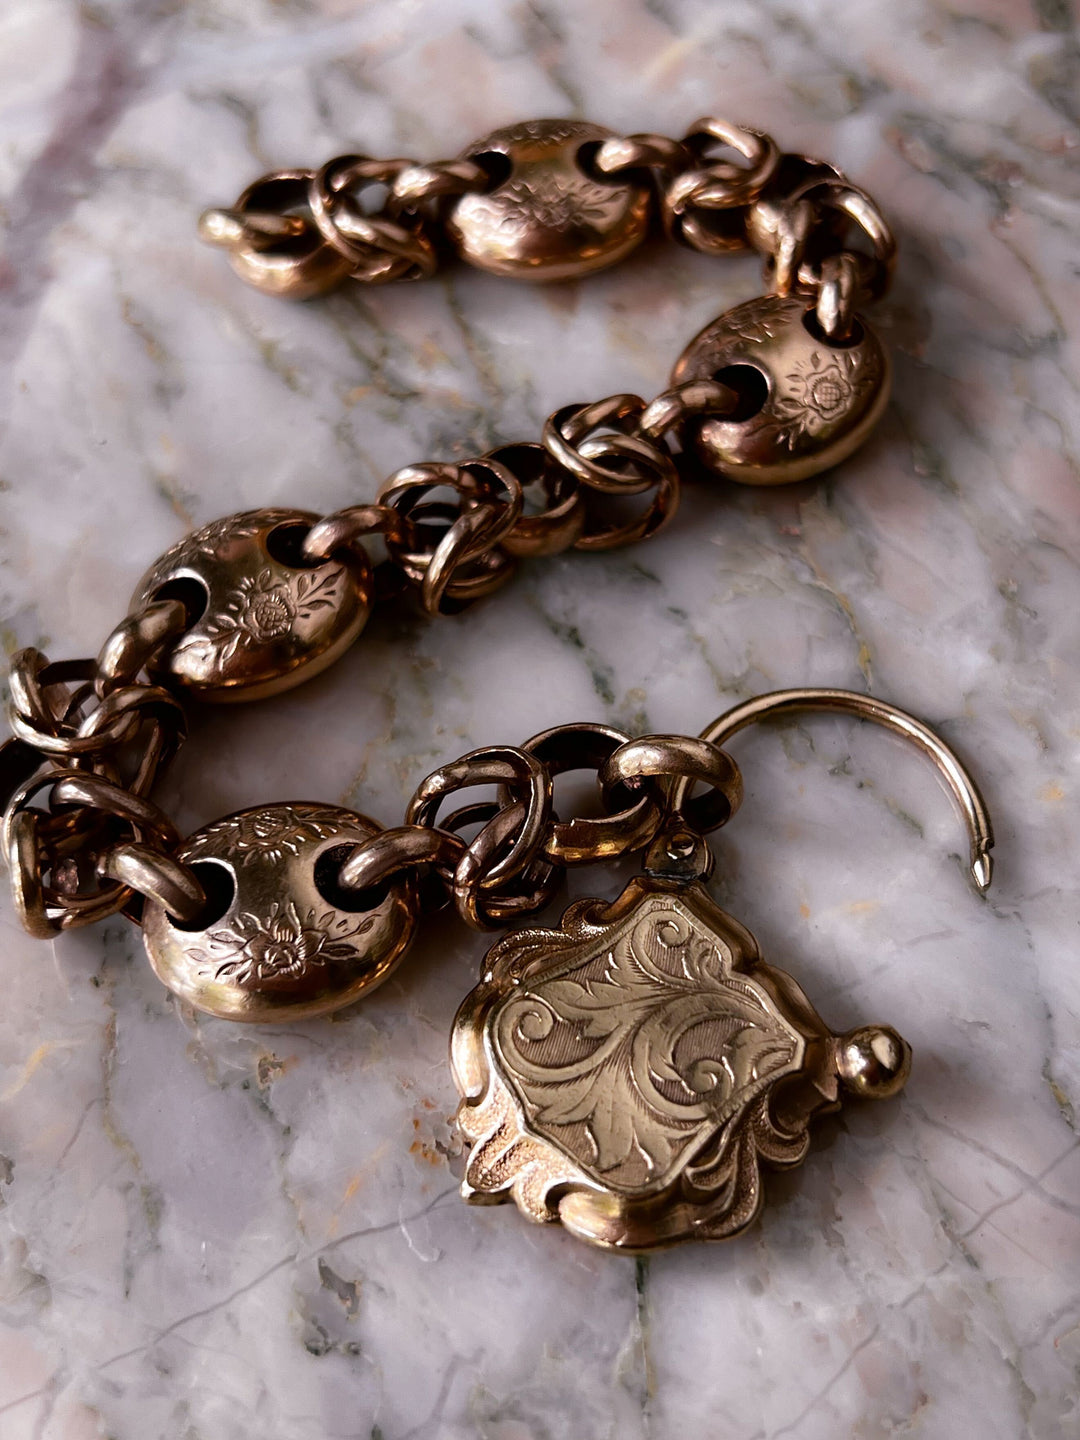 Special Pinchbeck & Brass Bracelet with Victorian Padlock